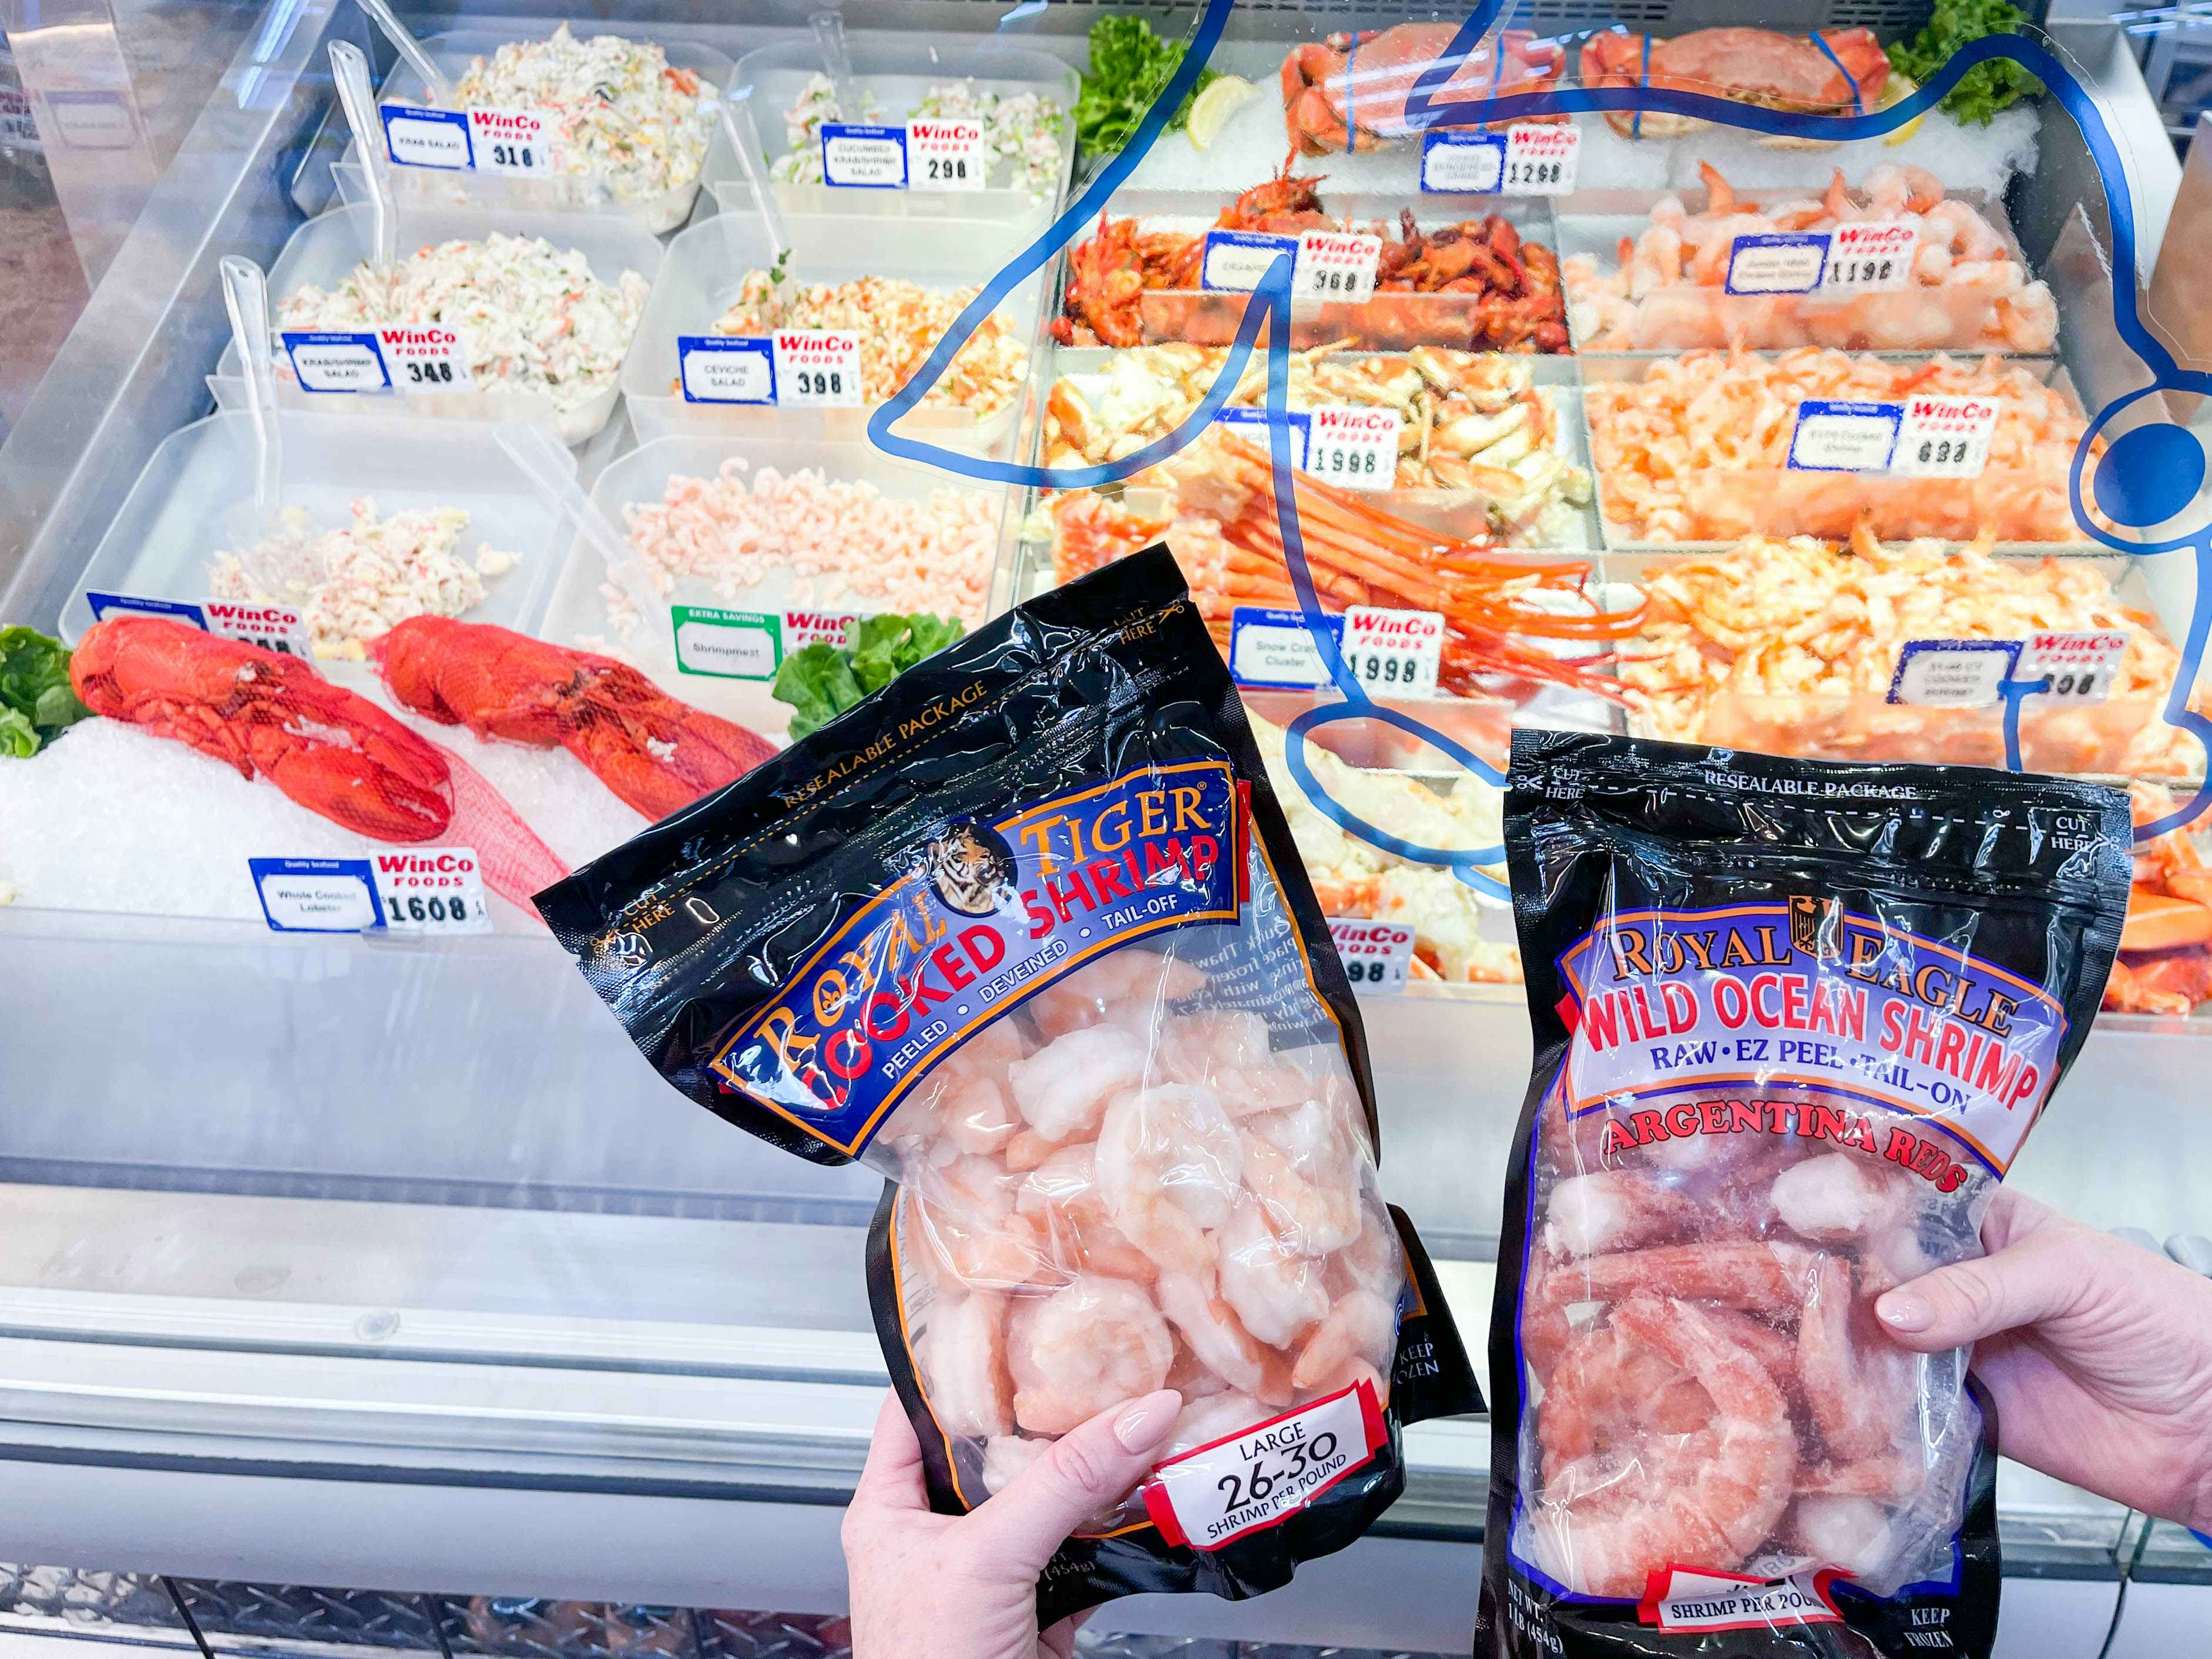 A person's hands holding up two bags of Royal Tiger Wild Ocean Shrimp in front of the seafood display at WinCo Foods.